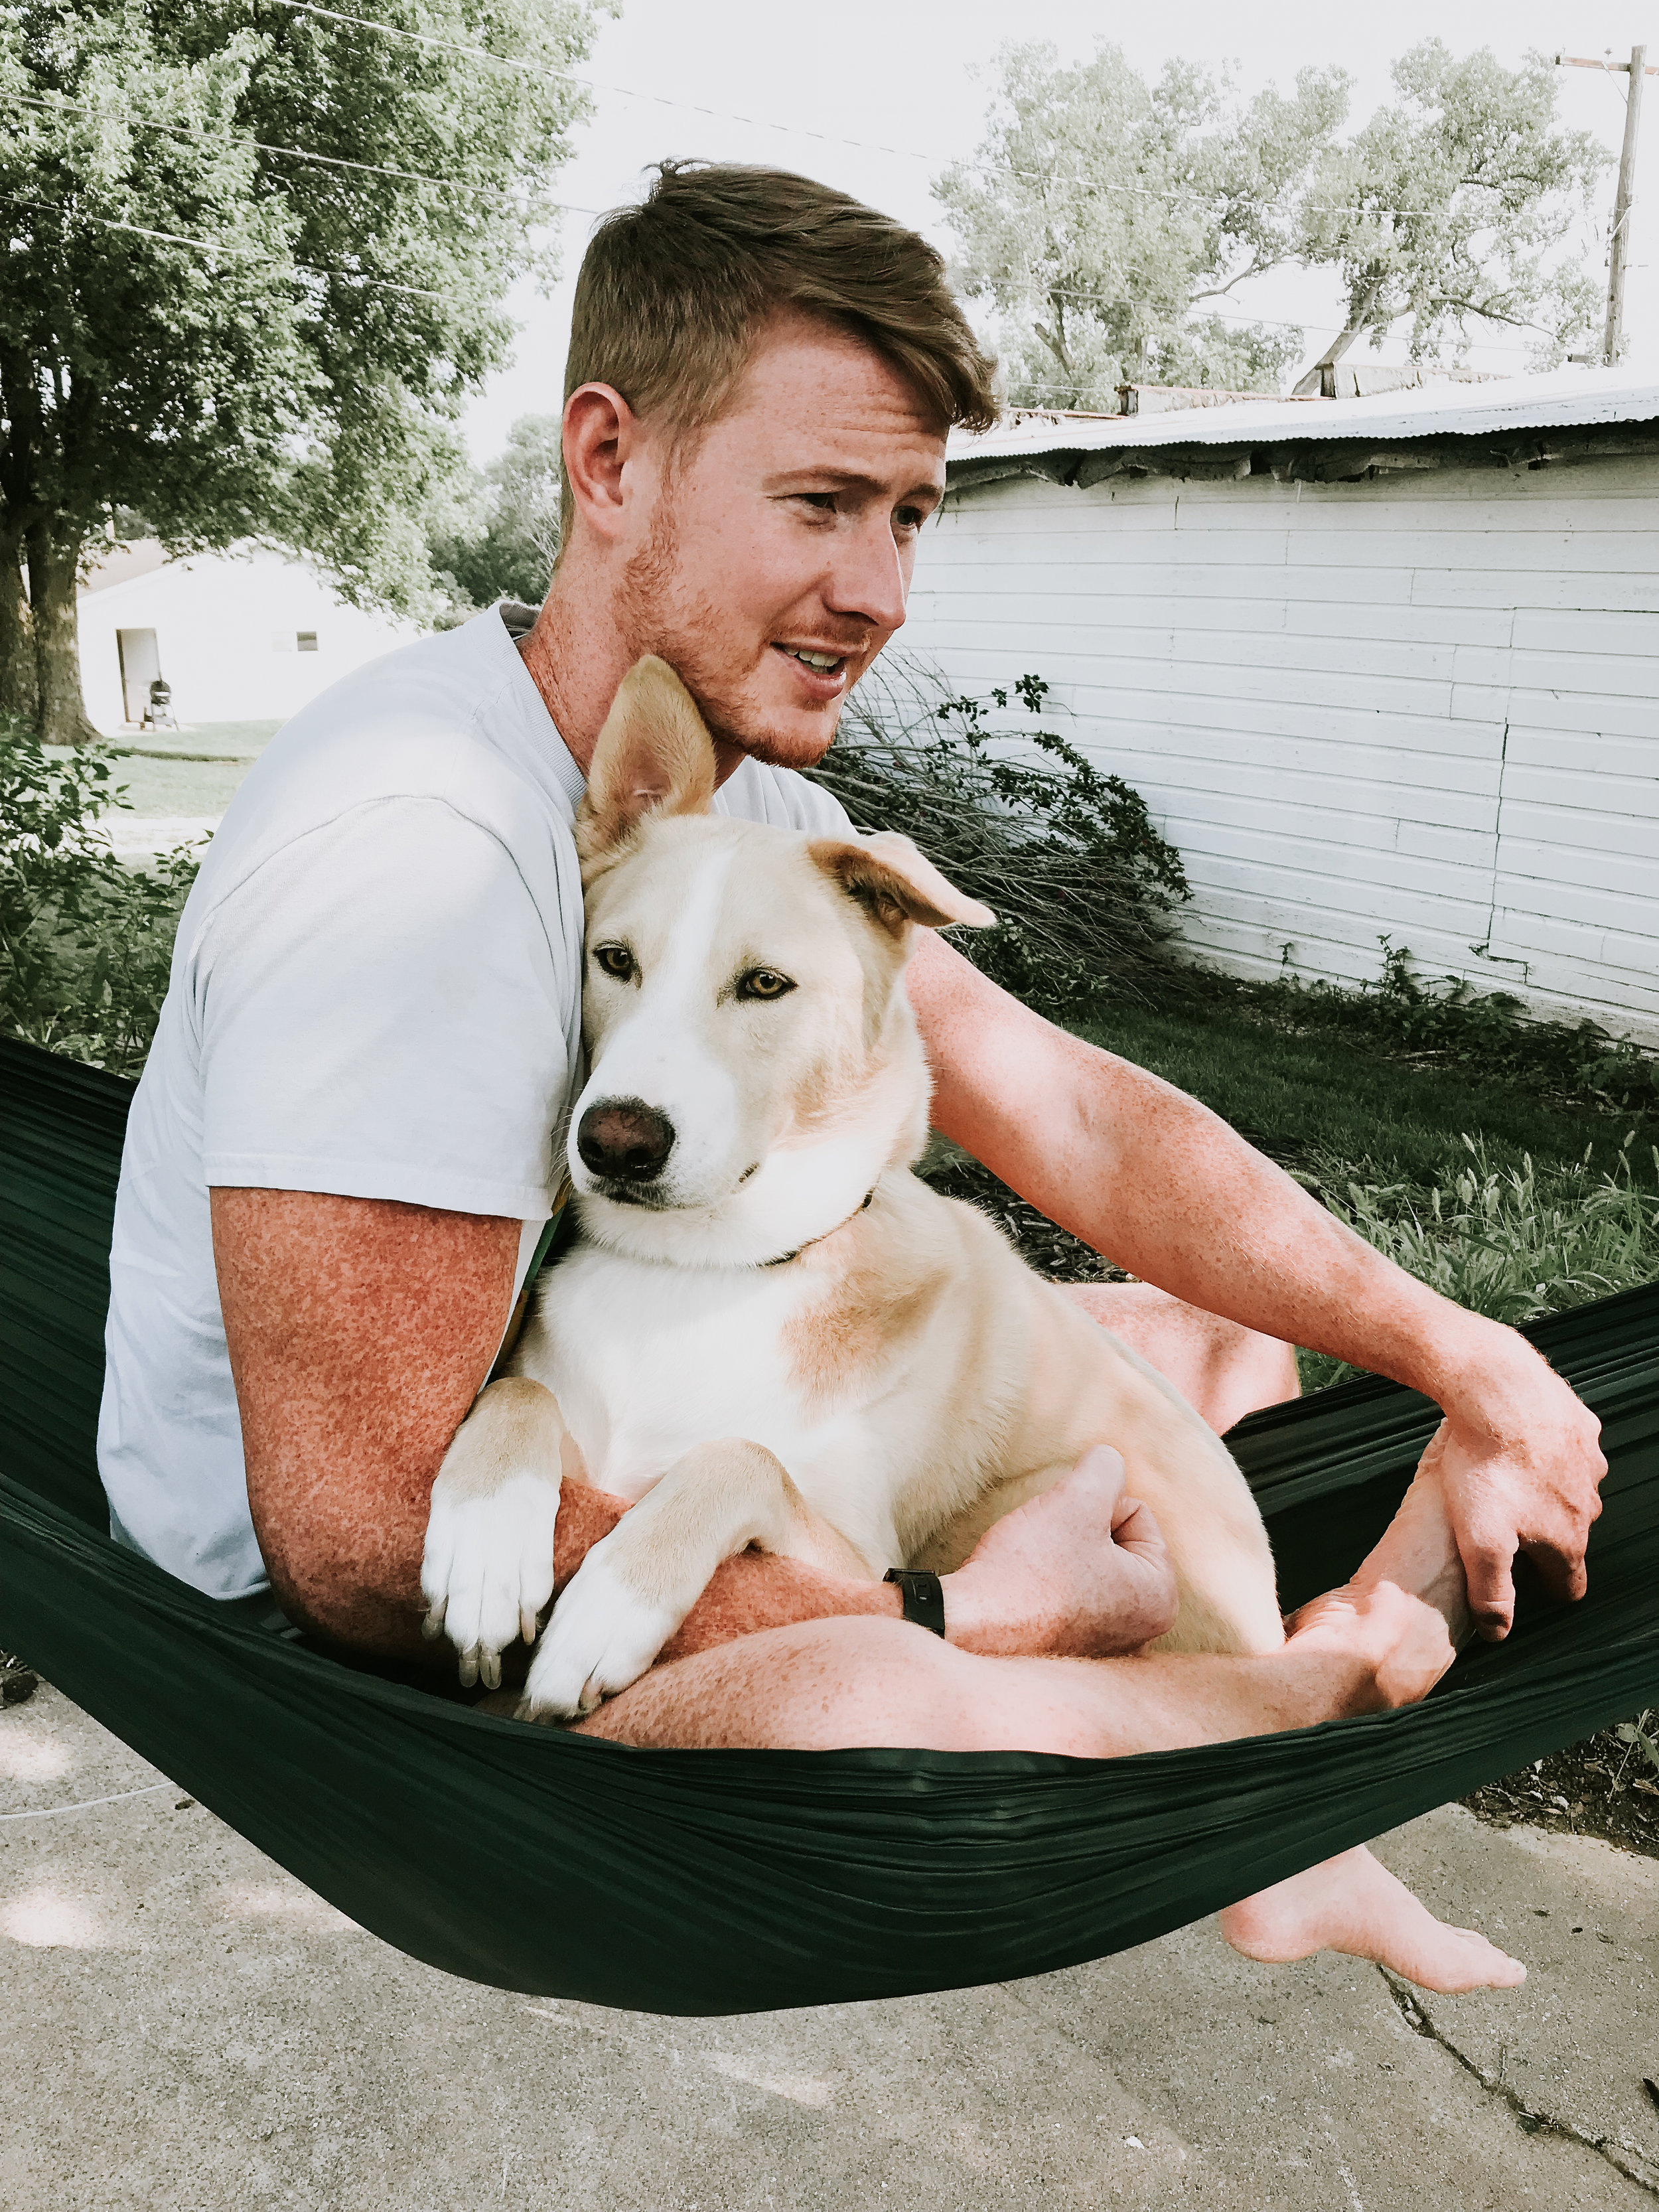 2018 in Review - What happened in our lives in 2018 - the behind the scenes of Refined Design - Chris and Teddy in the hammock